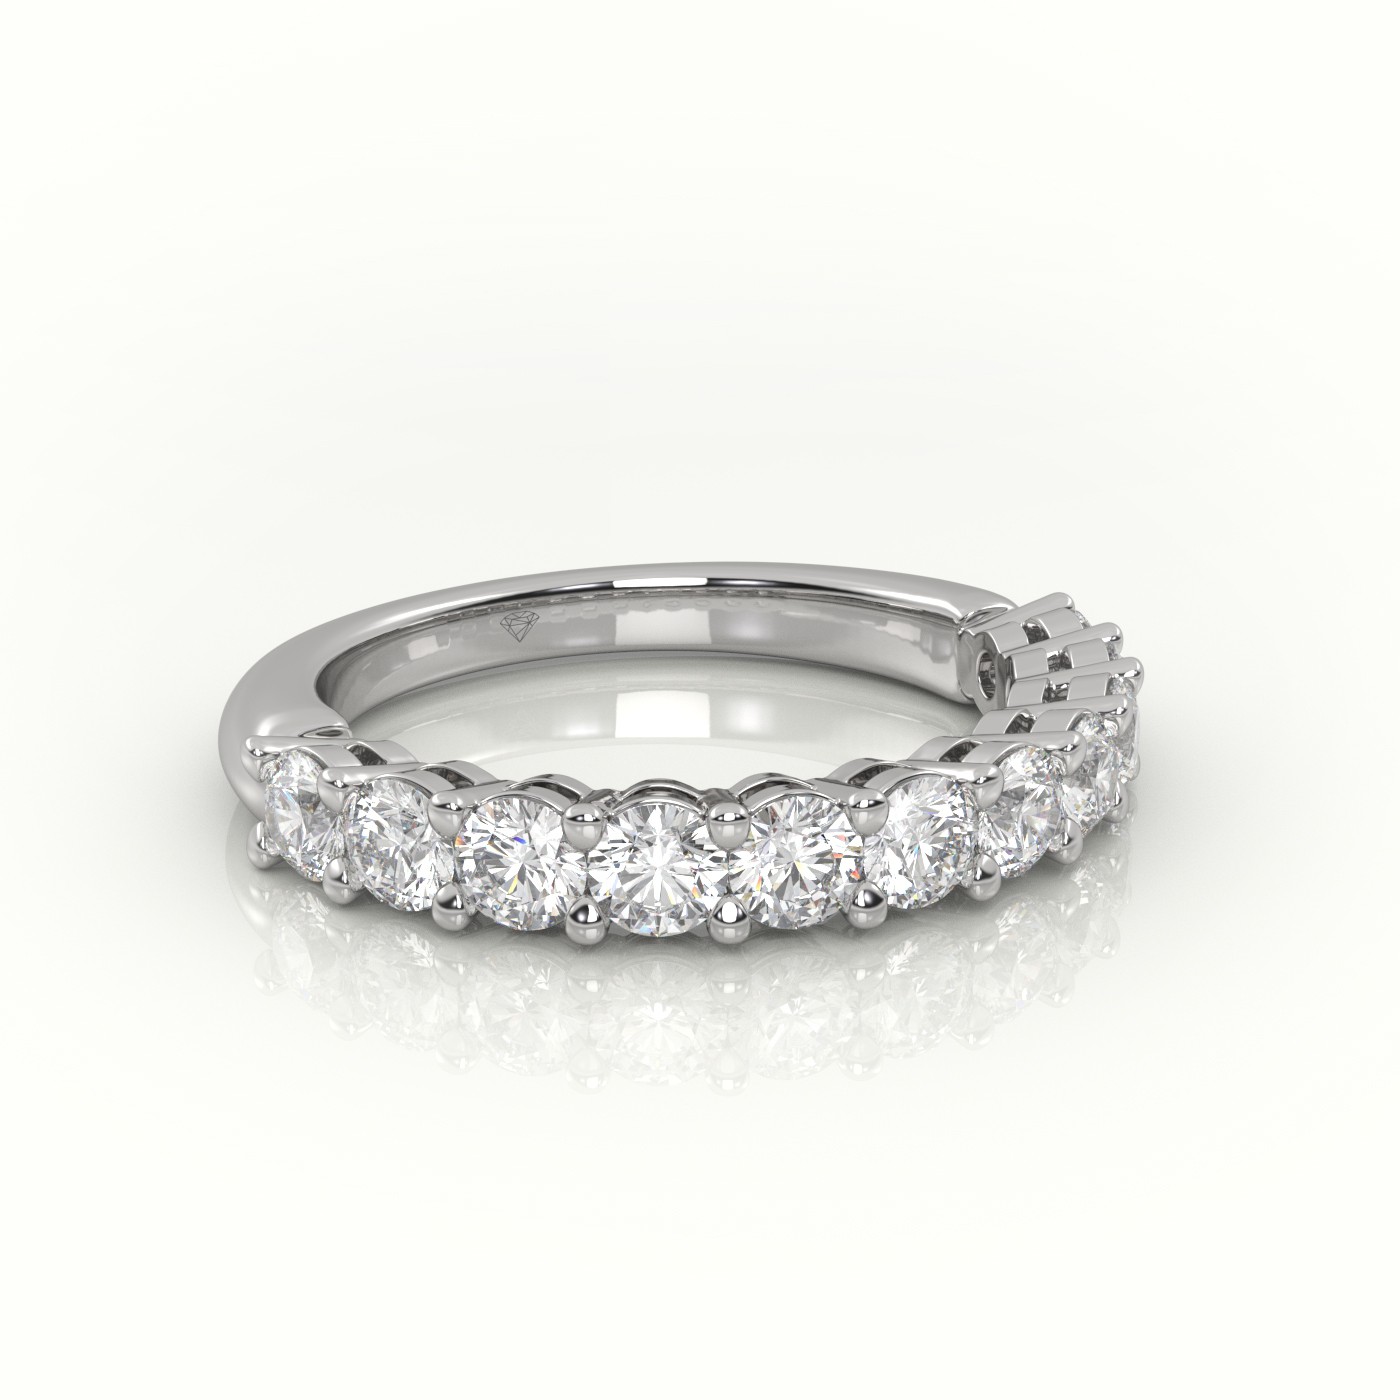 18k white gold  round cut diamonds shared prongs scallop setting half eternity wedding bands Photos & images